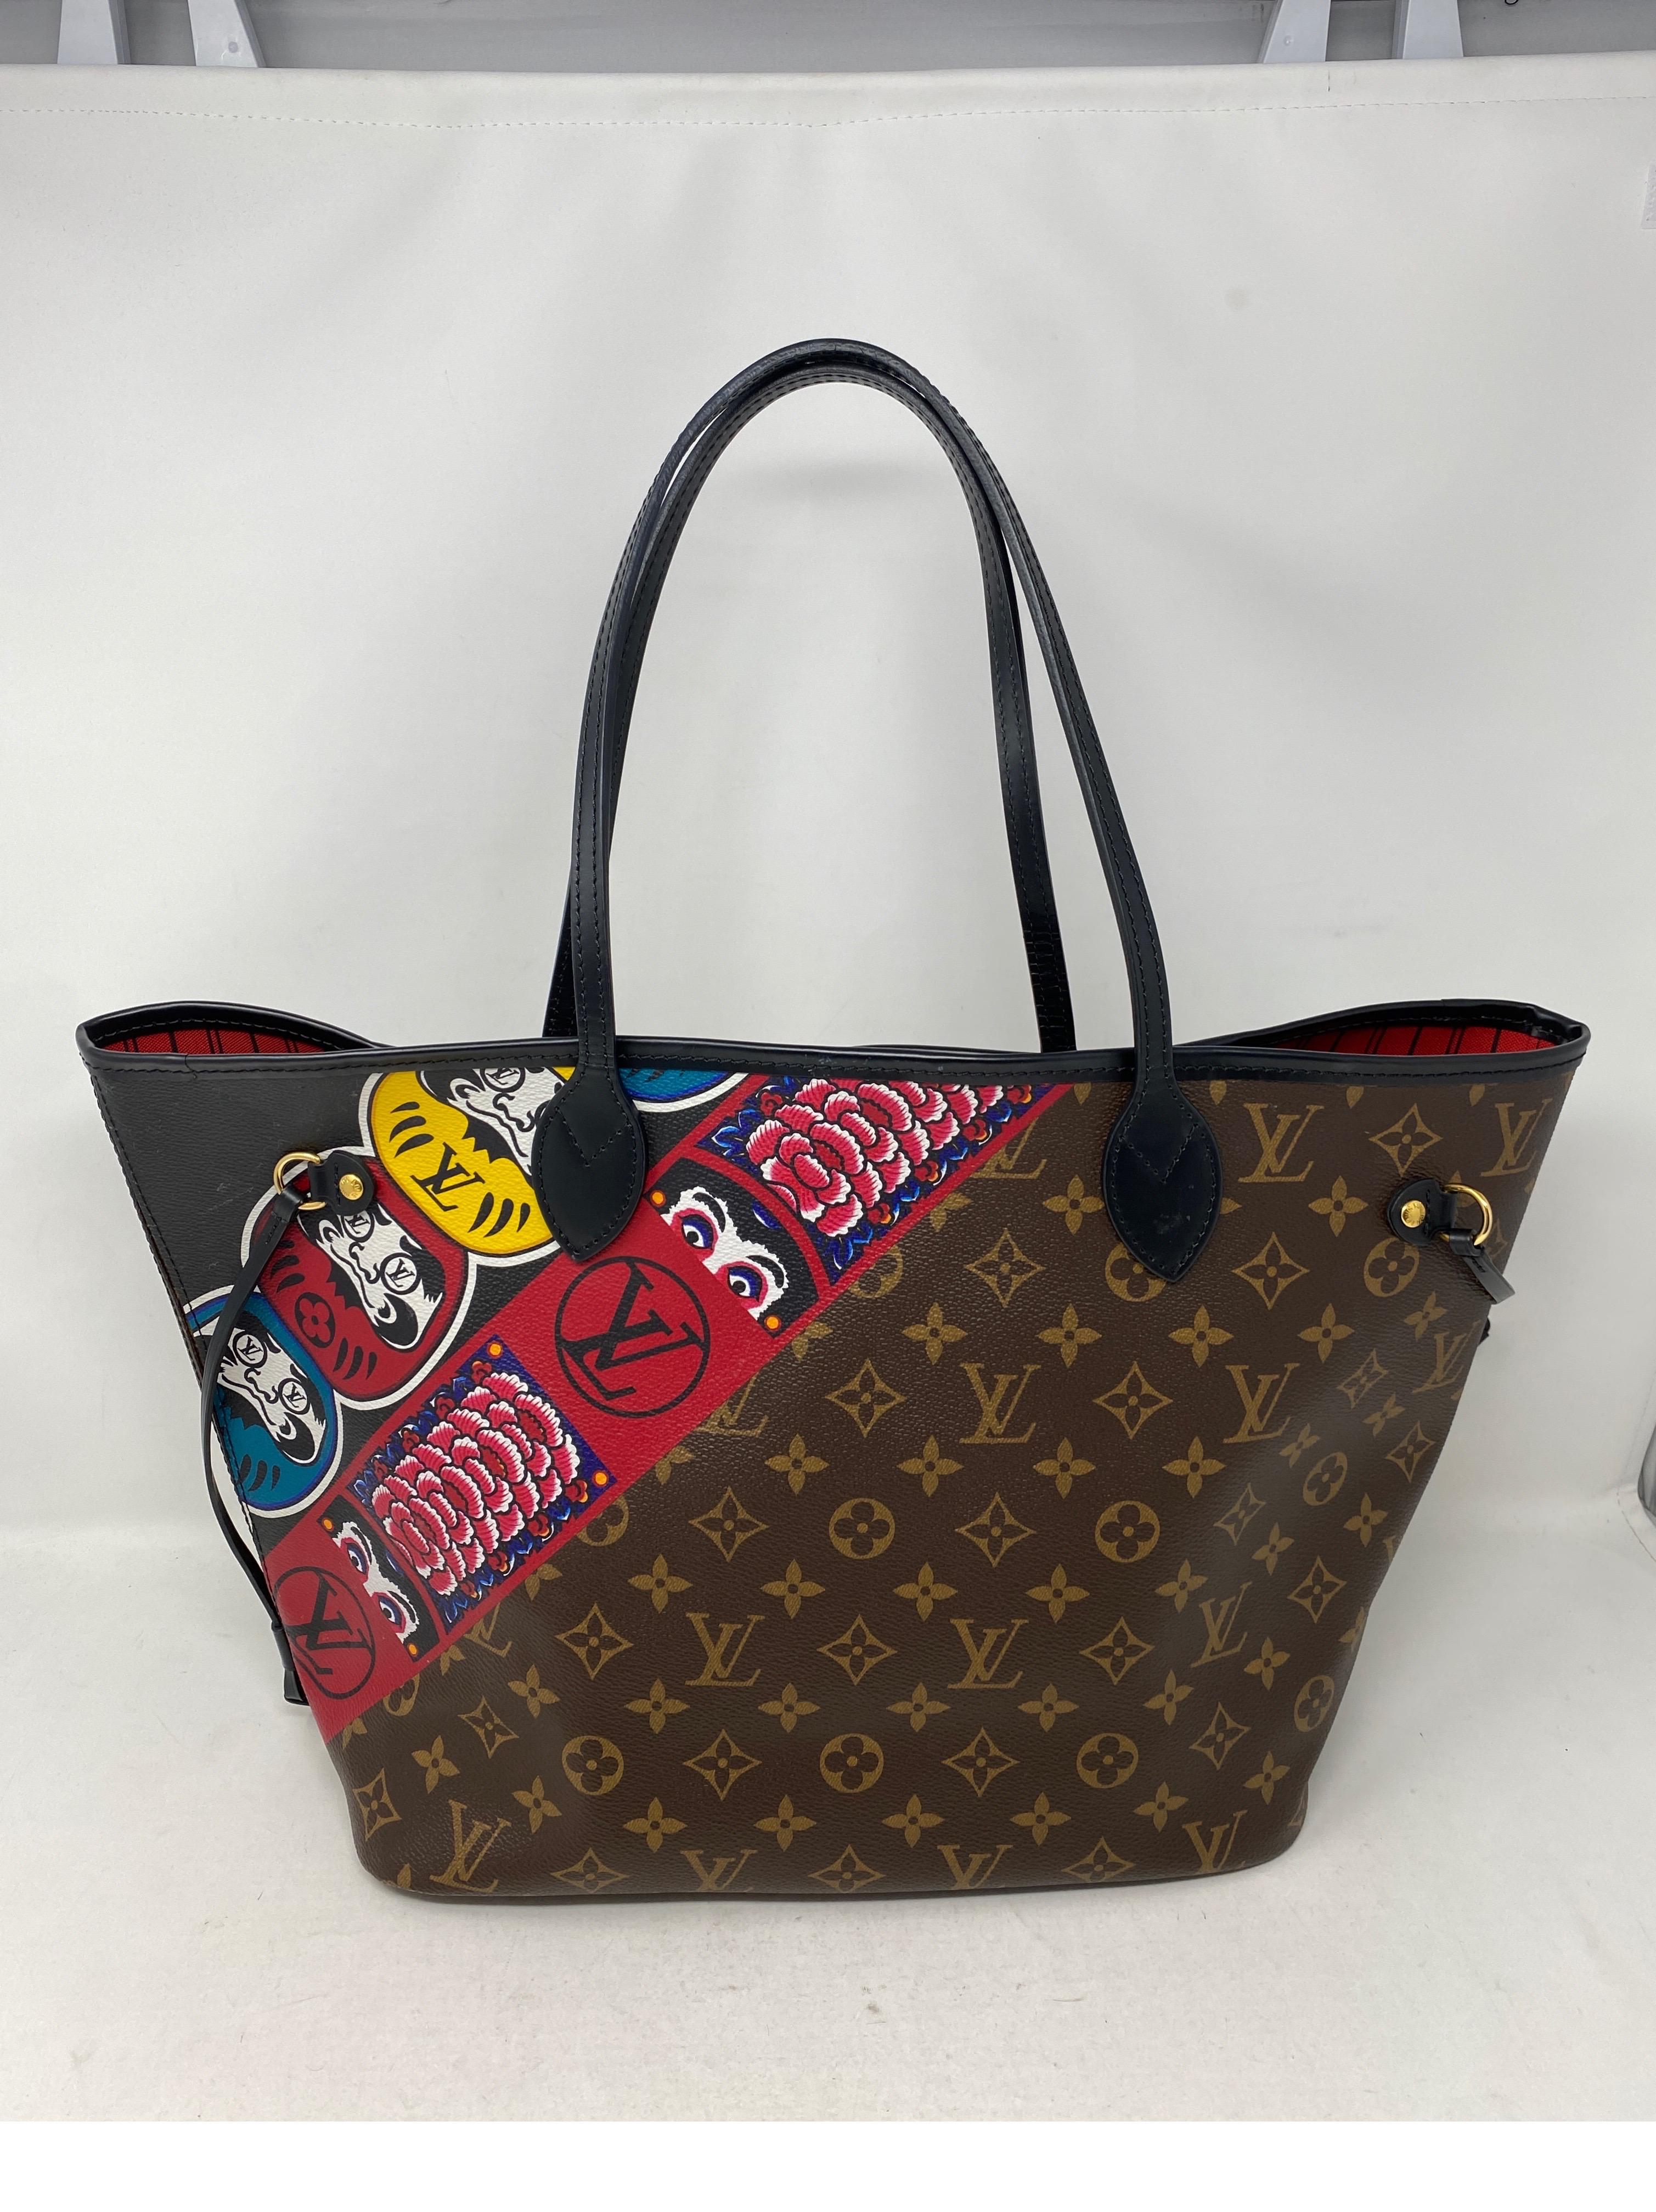 Louis Vuitton Kabuki Neverfull Bag. Rare and limited collection. Good condition. Medium MM size neverfull with Japanese art. Collector's piece. Guaranteed authentic. 